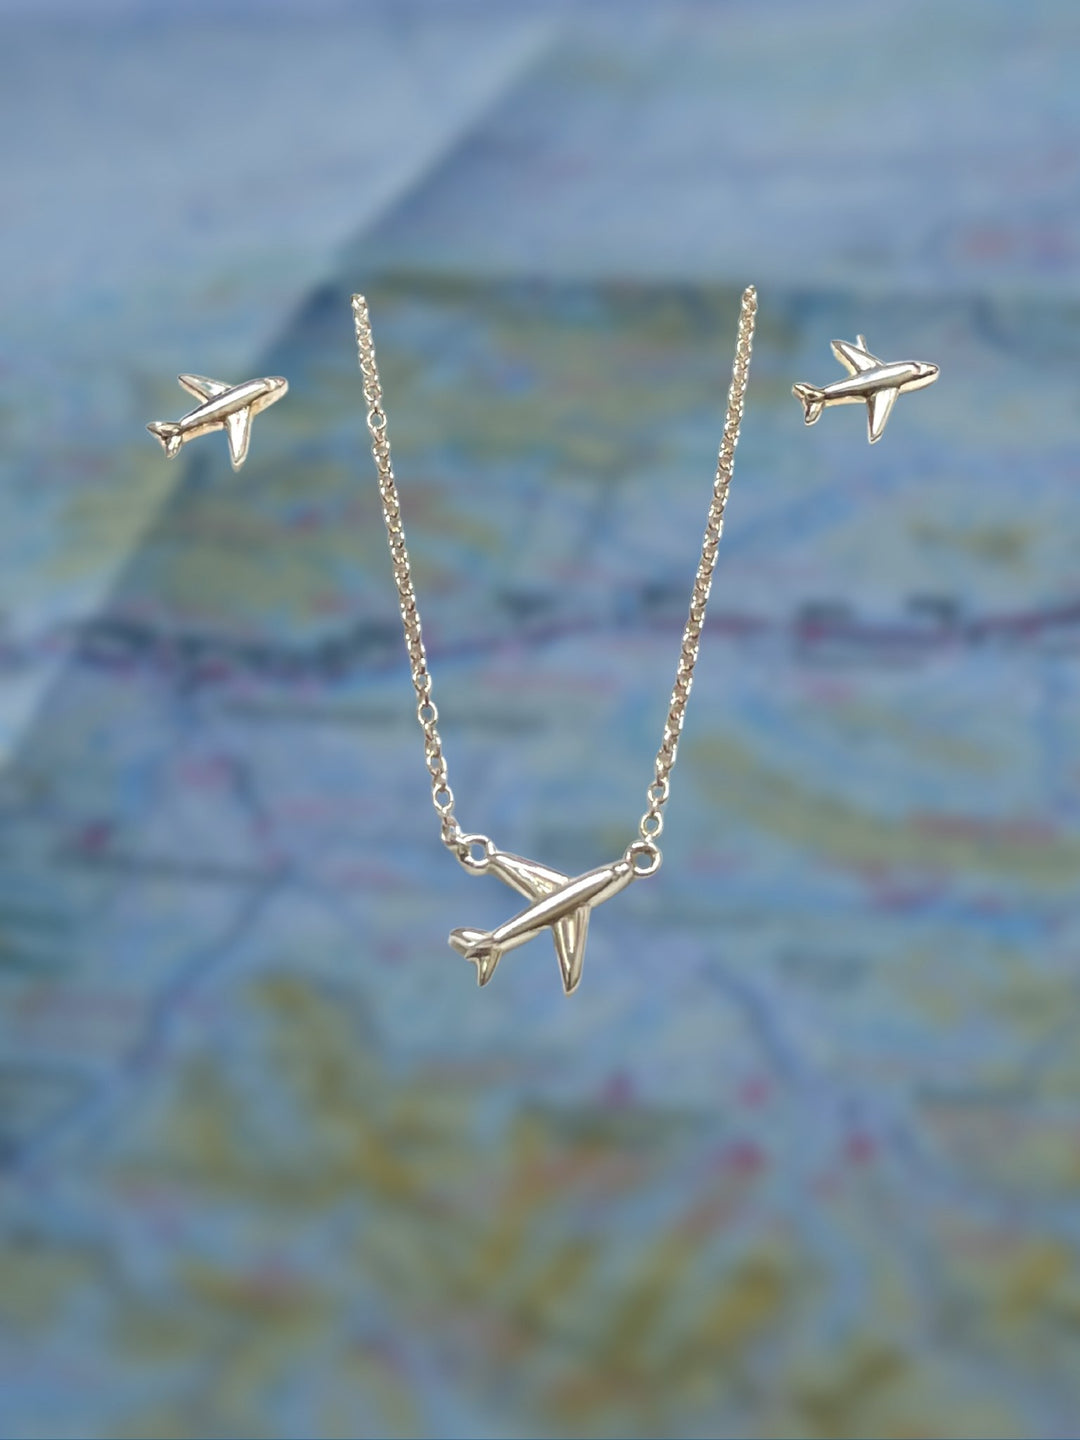 Matching sterling silver airplane earrings and necklace gift for pilot  or gift for flight attendant